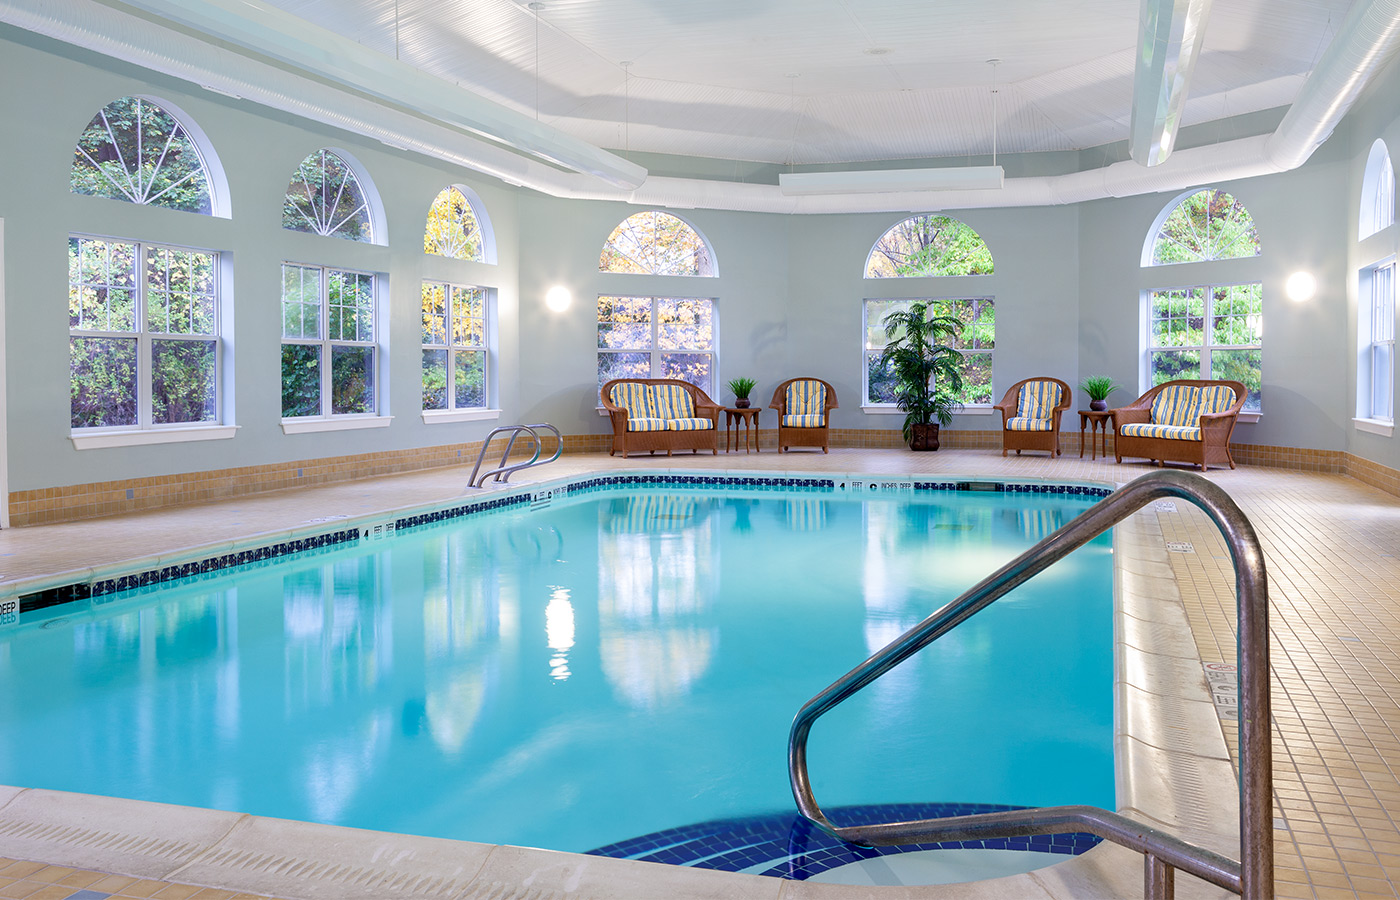 Indoor pool with seating area.